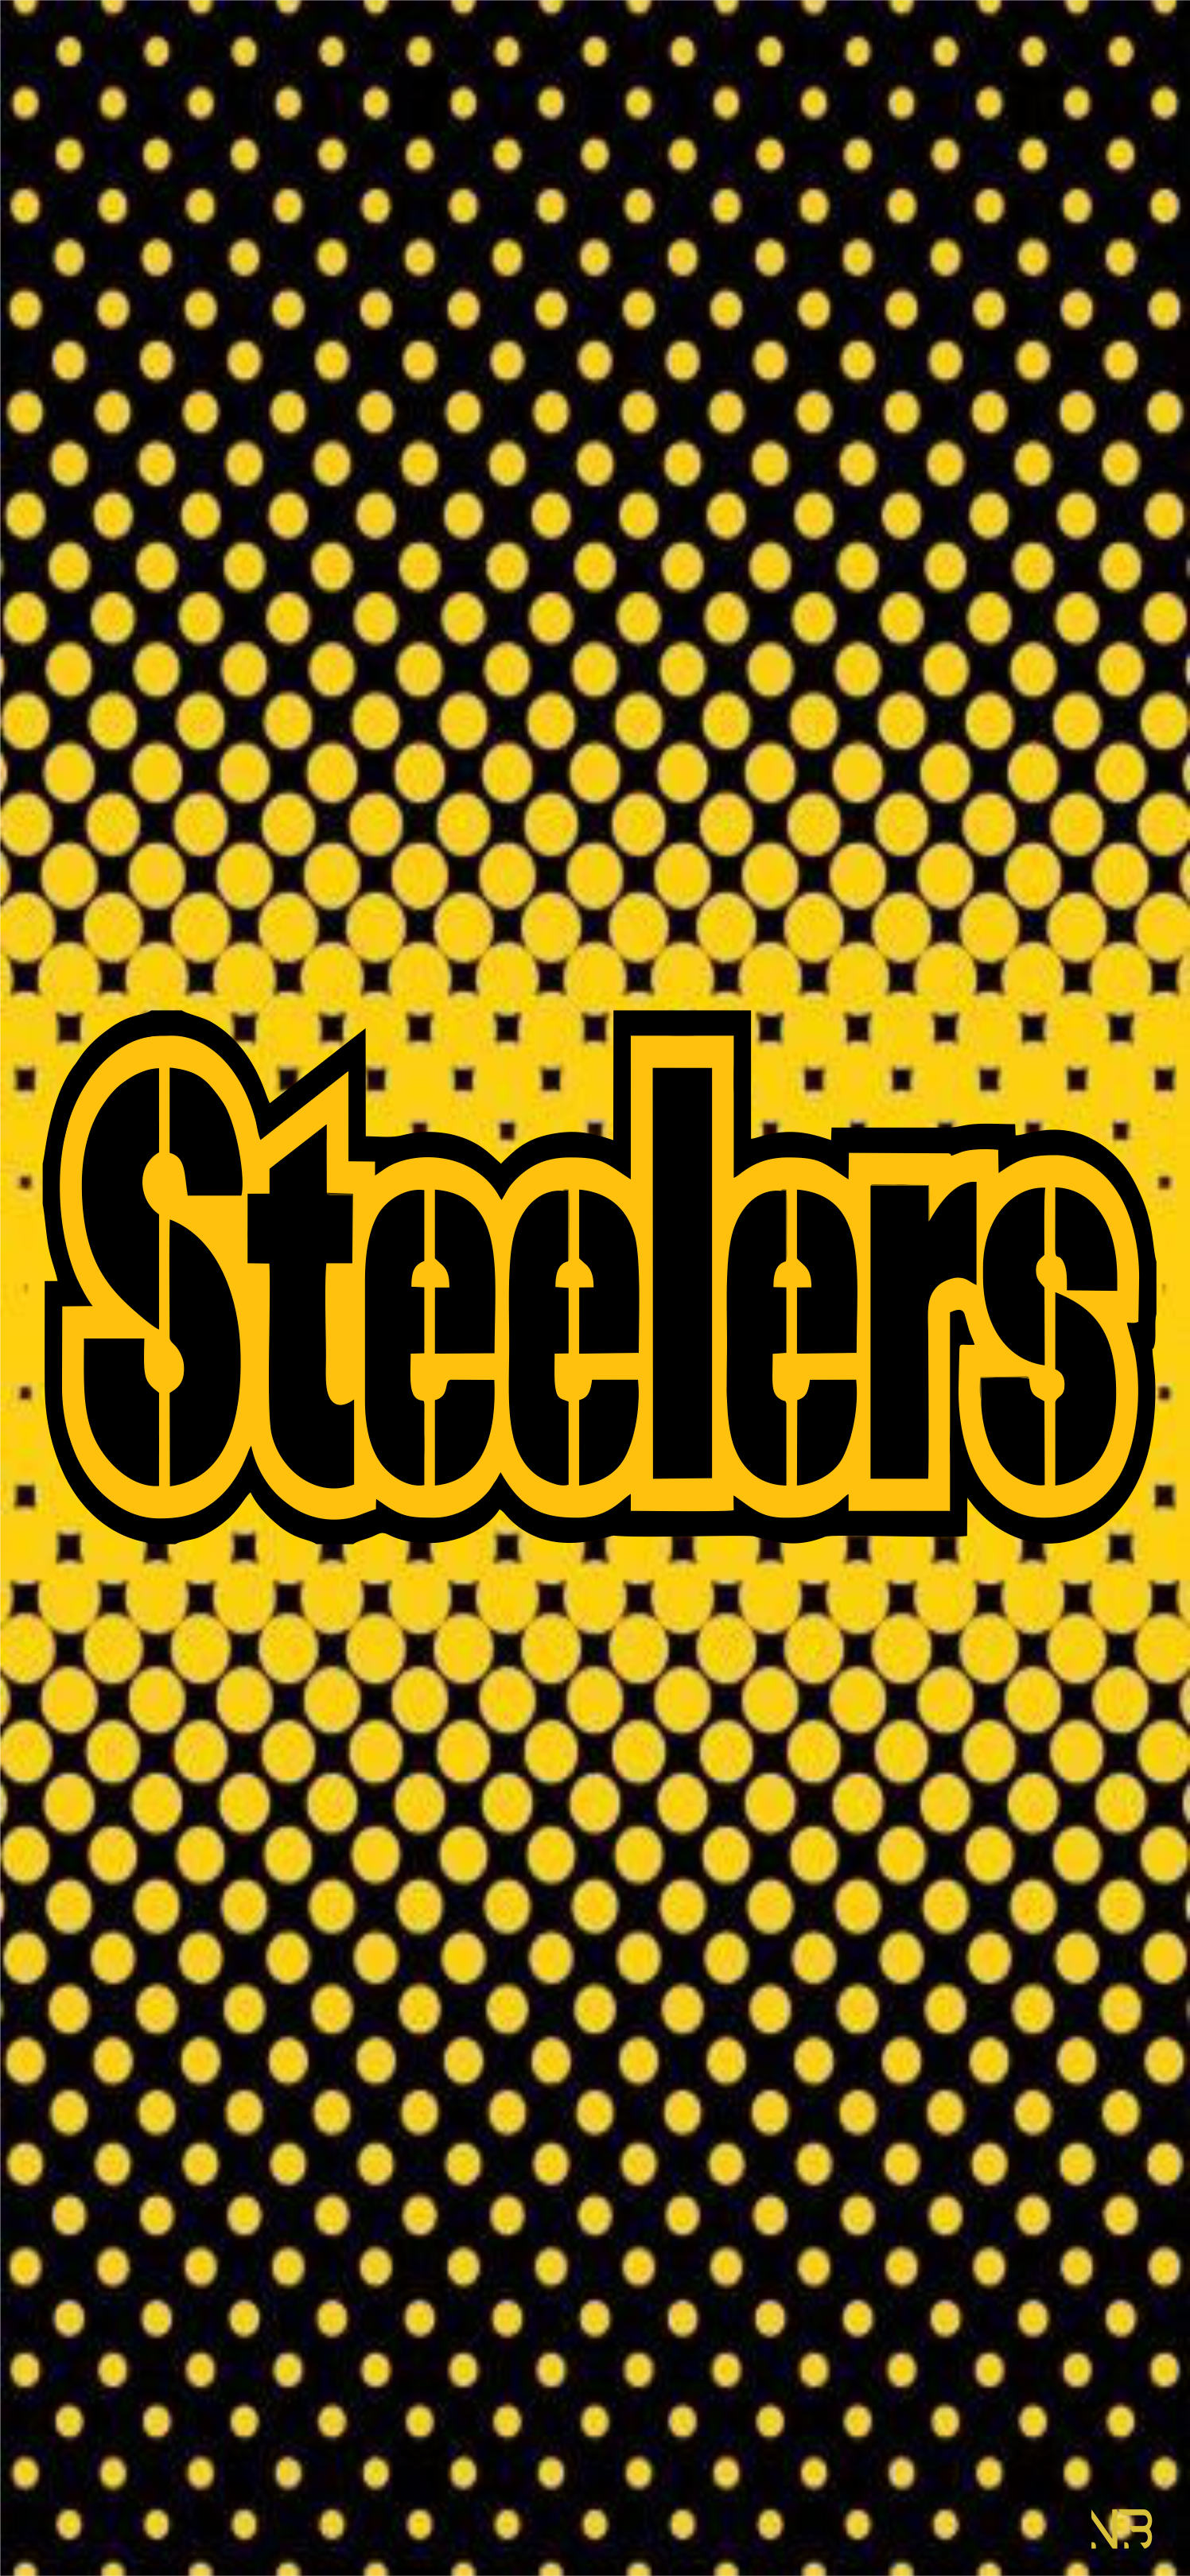 1496x3239 Pin by Michael on Pittsburgh steelers wallpaper | Pittsburgh steelers logo, Pittsburgh steelers football, Pittsburgh steelers wallpaper